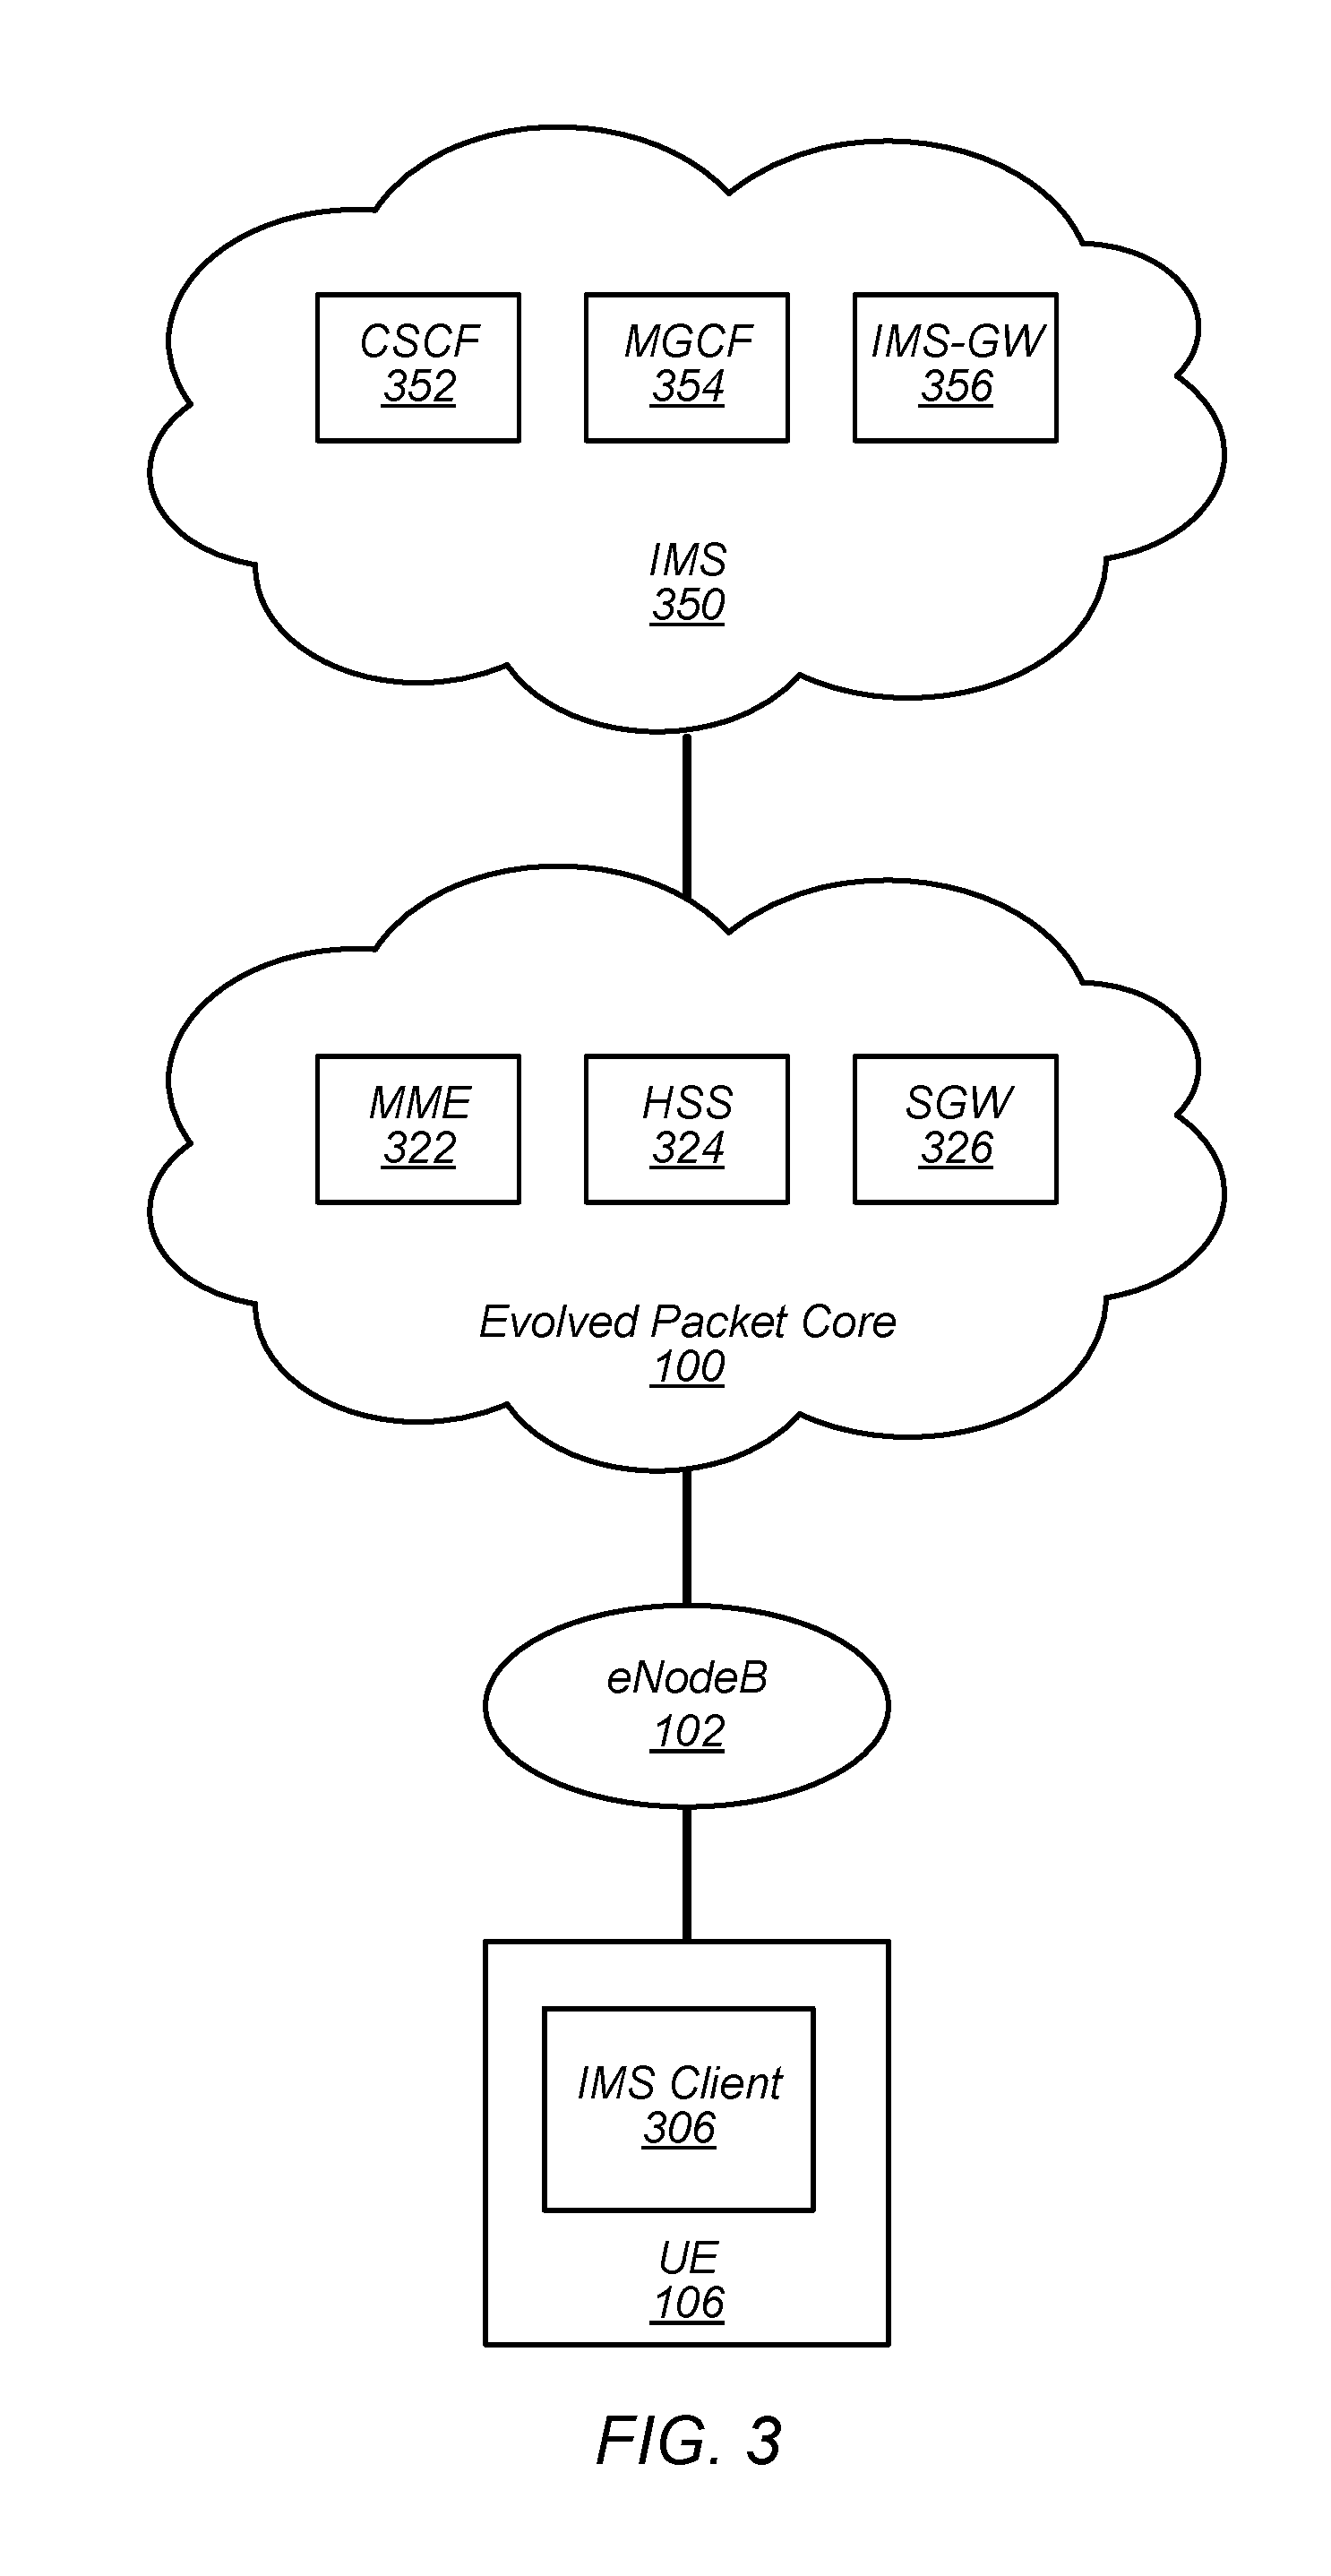 Link Quality Based Single Radio-Voice Call Continuity and Packet Scheduling for Voice over Long Term Evolution Communications